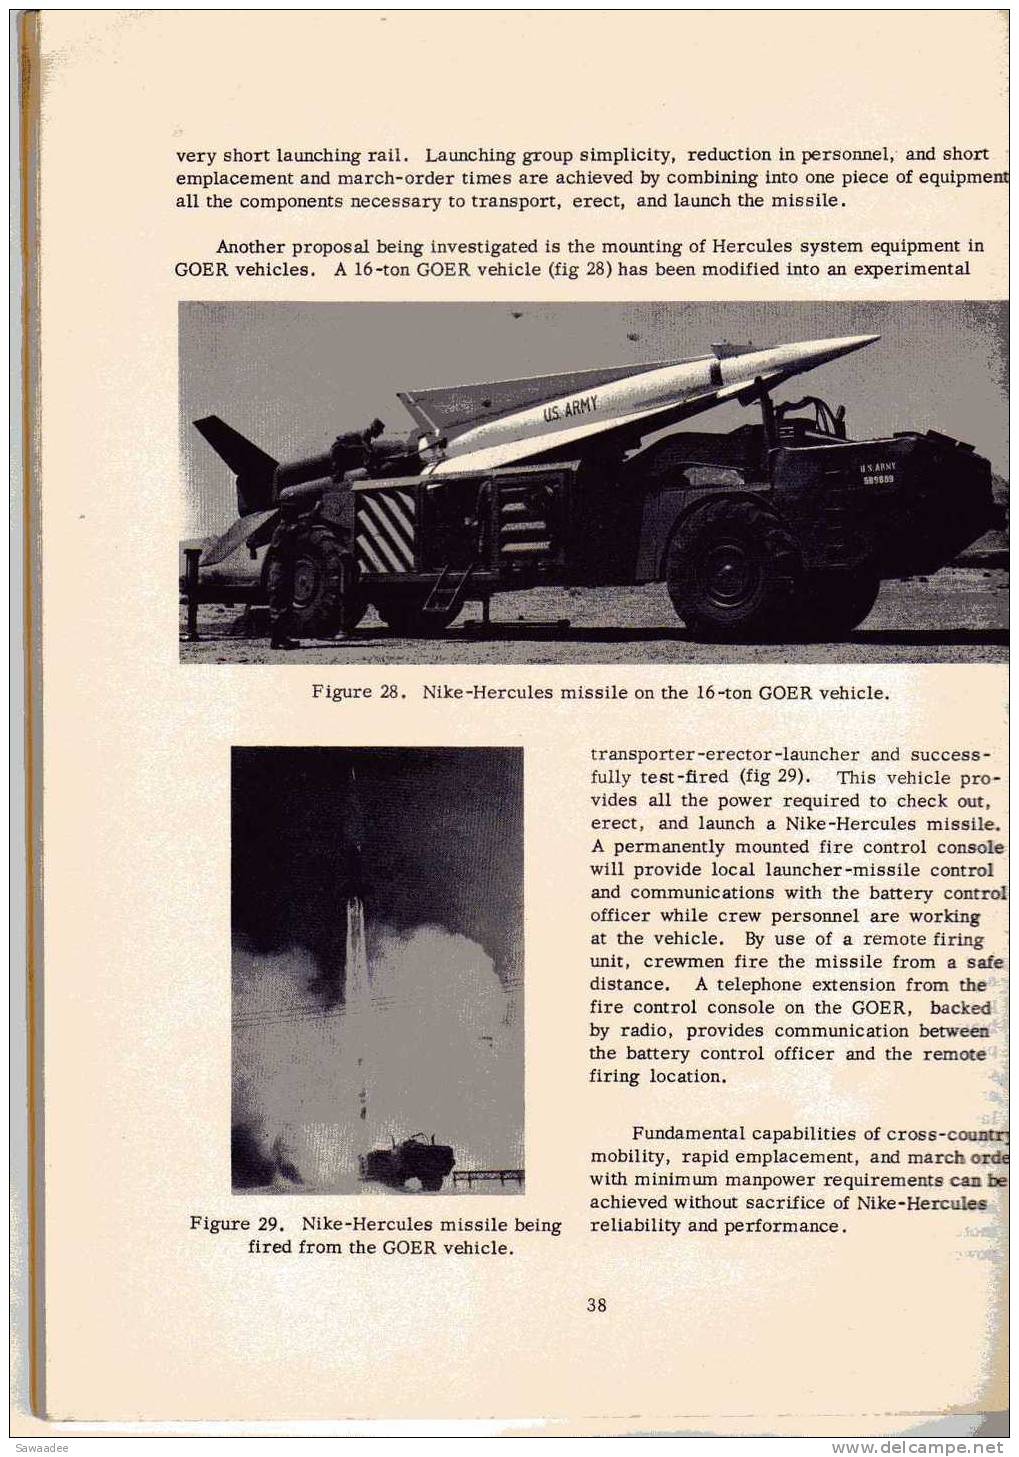 DOCUMENT - MILITARIA  - U.S. ARMY AIR DEFENSE -  FORT BLISS - TEXAS - 1962/63 - 78 PAGES - NBRES ILLUSTRATIONS, PHOTOS - Guerras Implicadas US